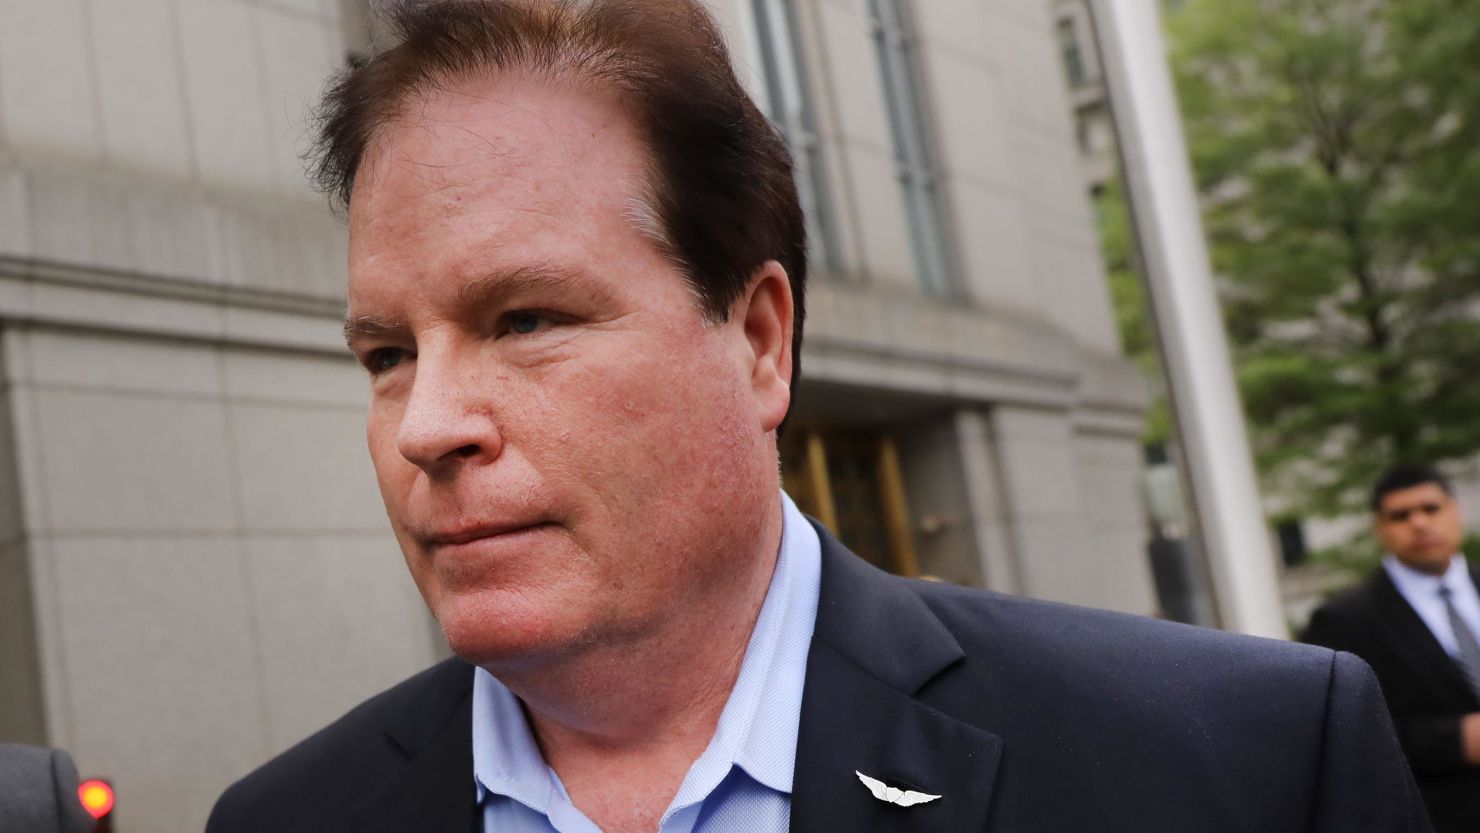 Stephen Calk walks out of a Manhattan court house on May 23, 2019 in New York City. 